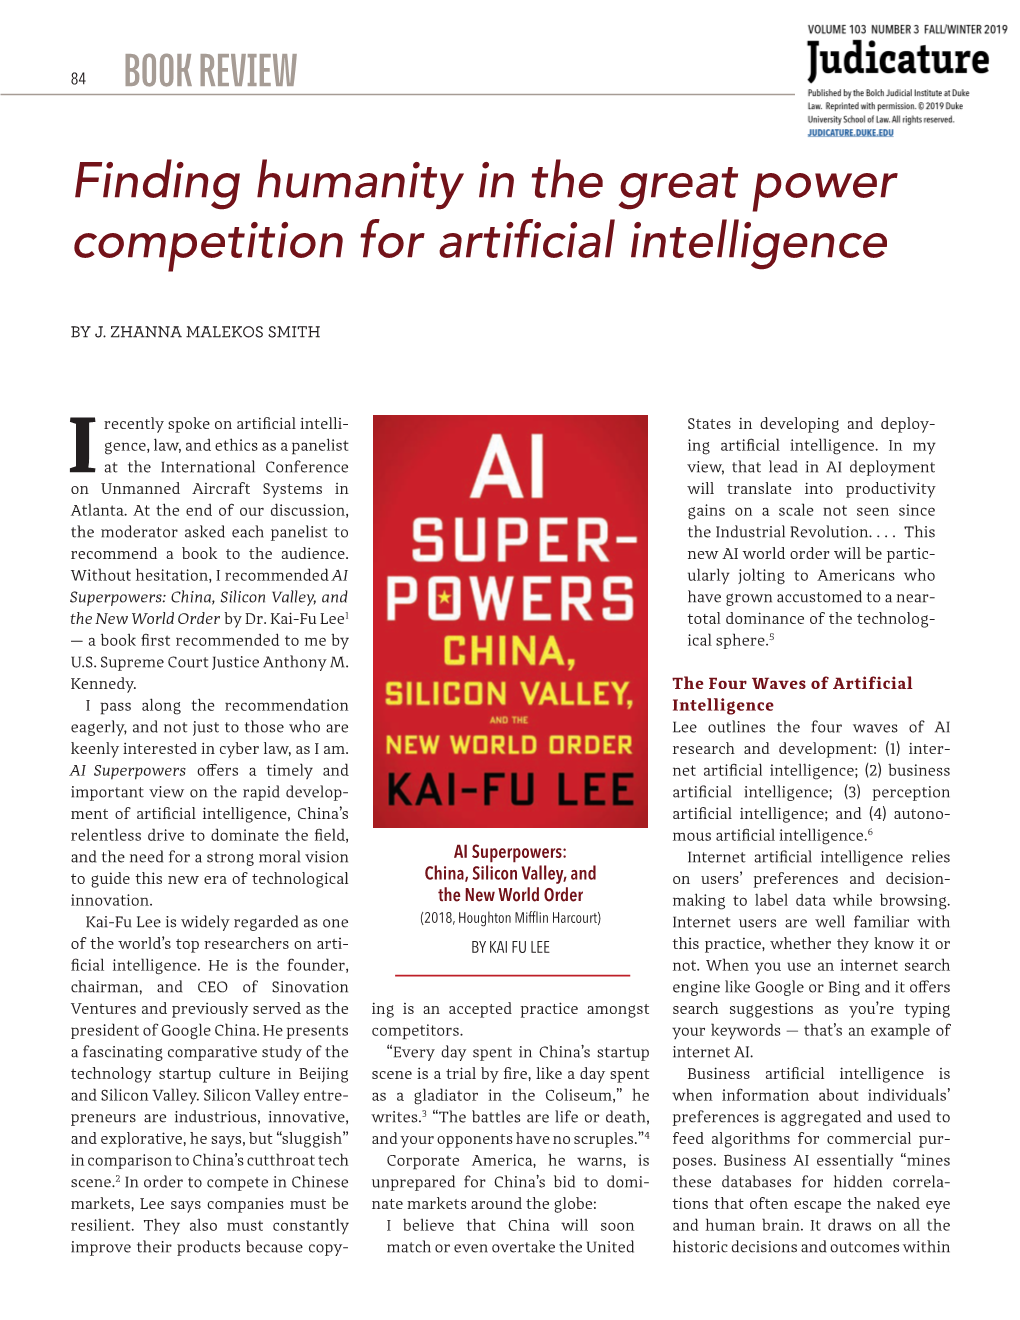 Finding Humanity in the Great Power Competition for Artificial Intelligence